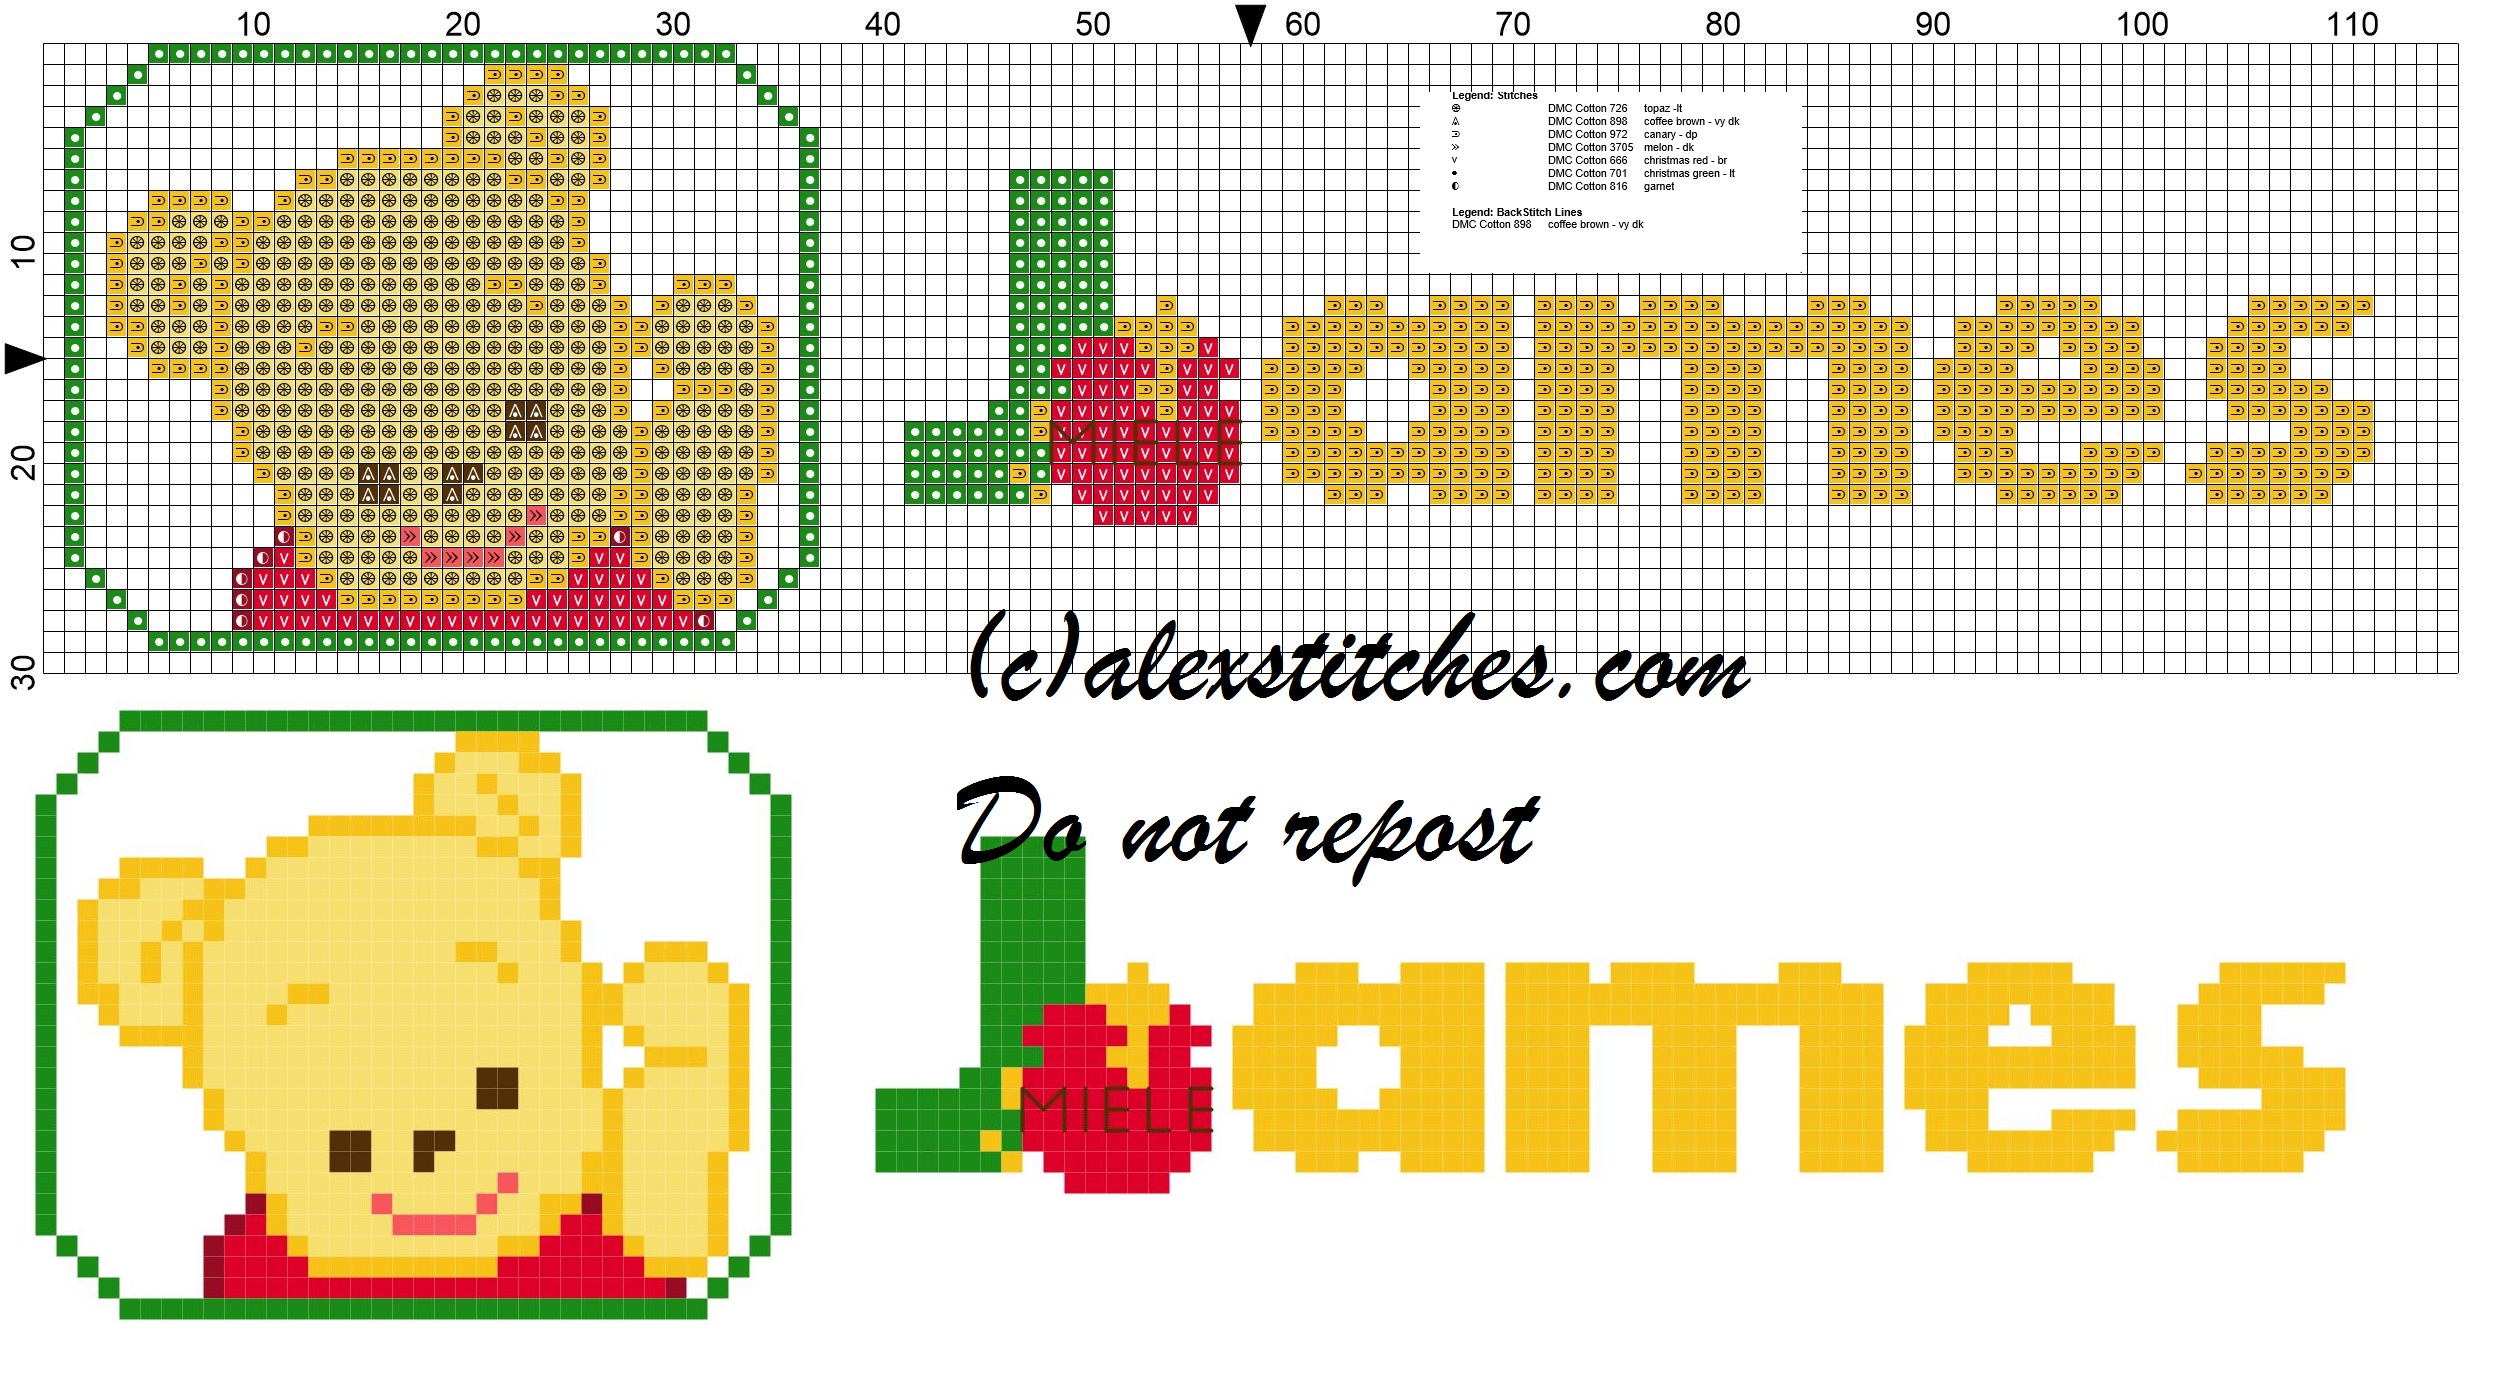 James name with Baby winnie the pooh free cross stitches pattern